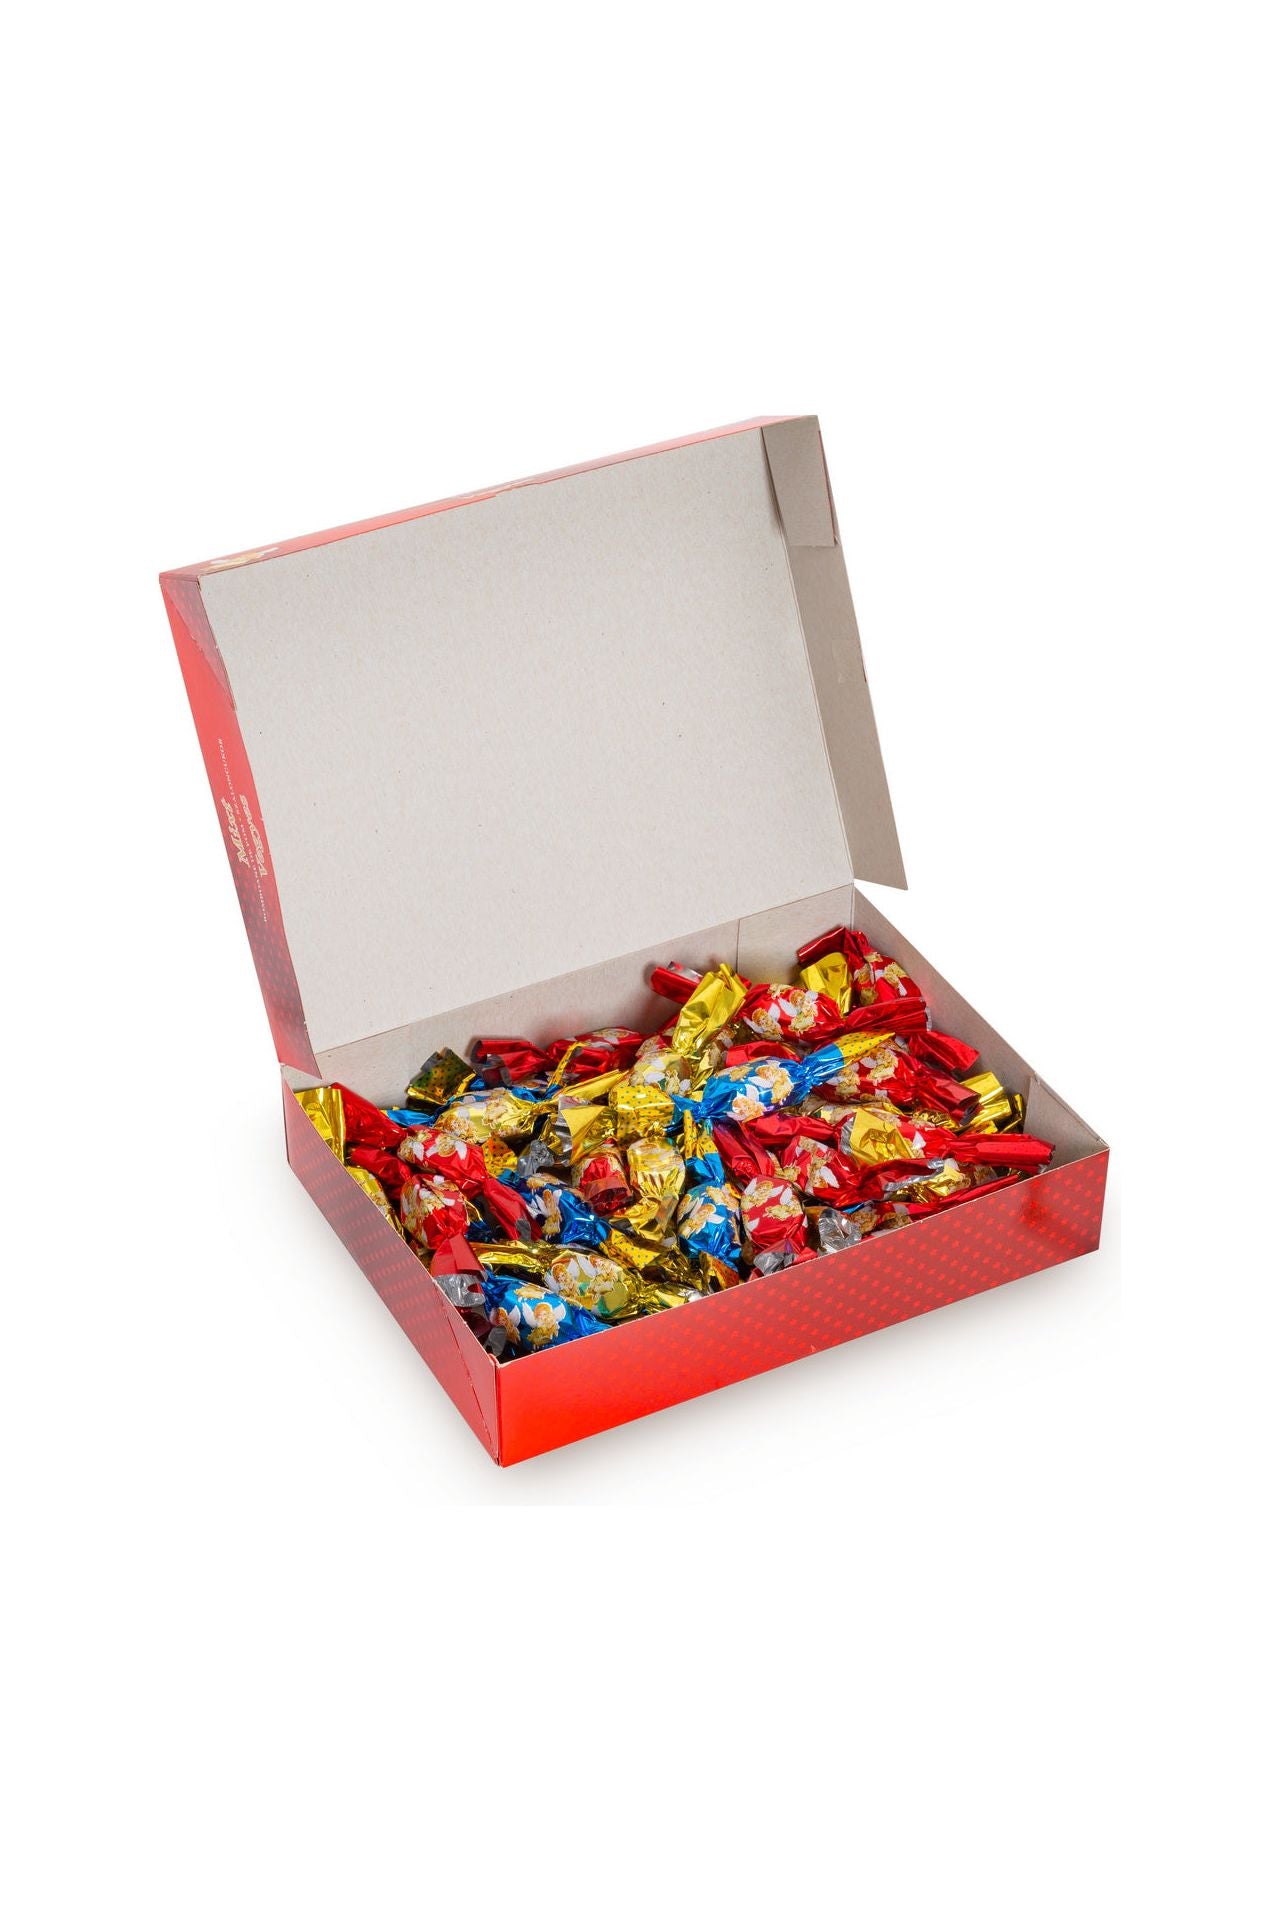 Candy Box - ChocoPack - Assorted Jelly Candies - 800g